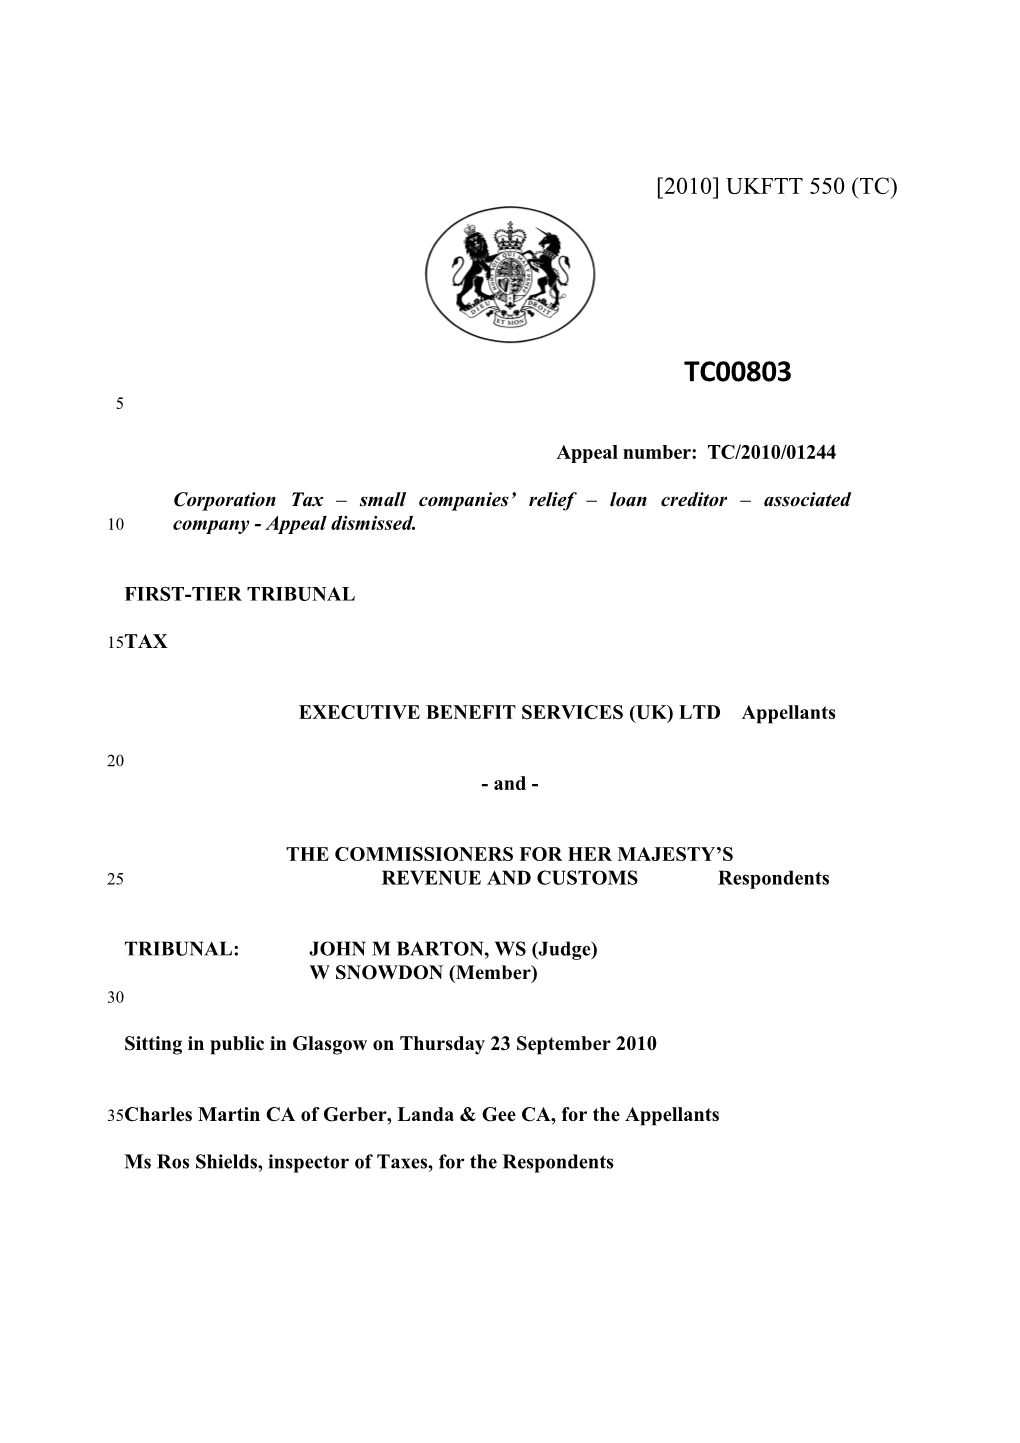 Corporation Tax Small Companies Relief Loan Creditor Associated Company - Appeal Dismissed